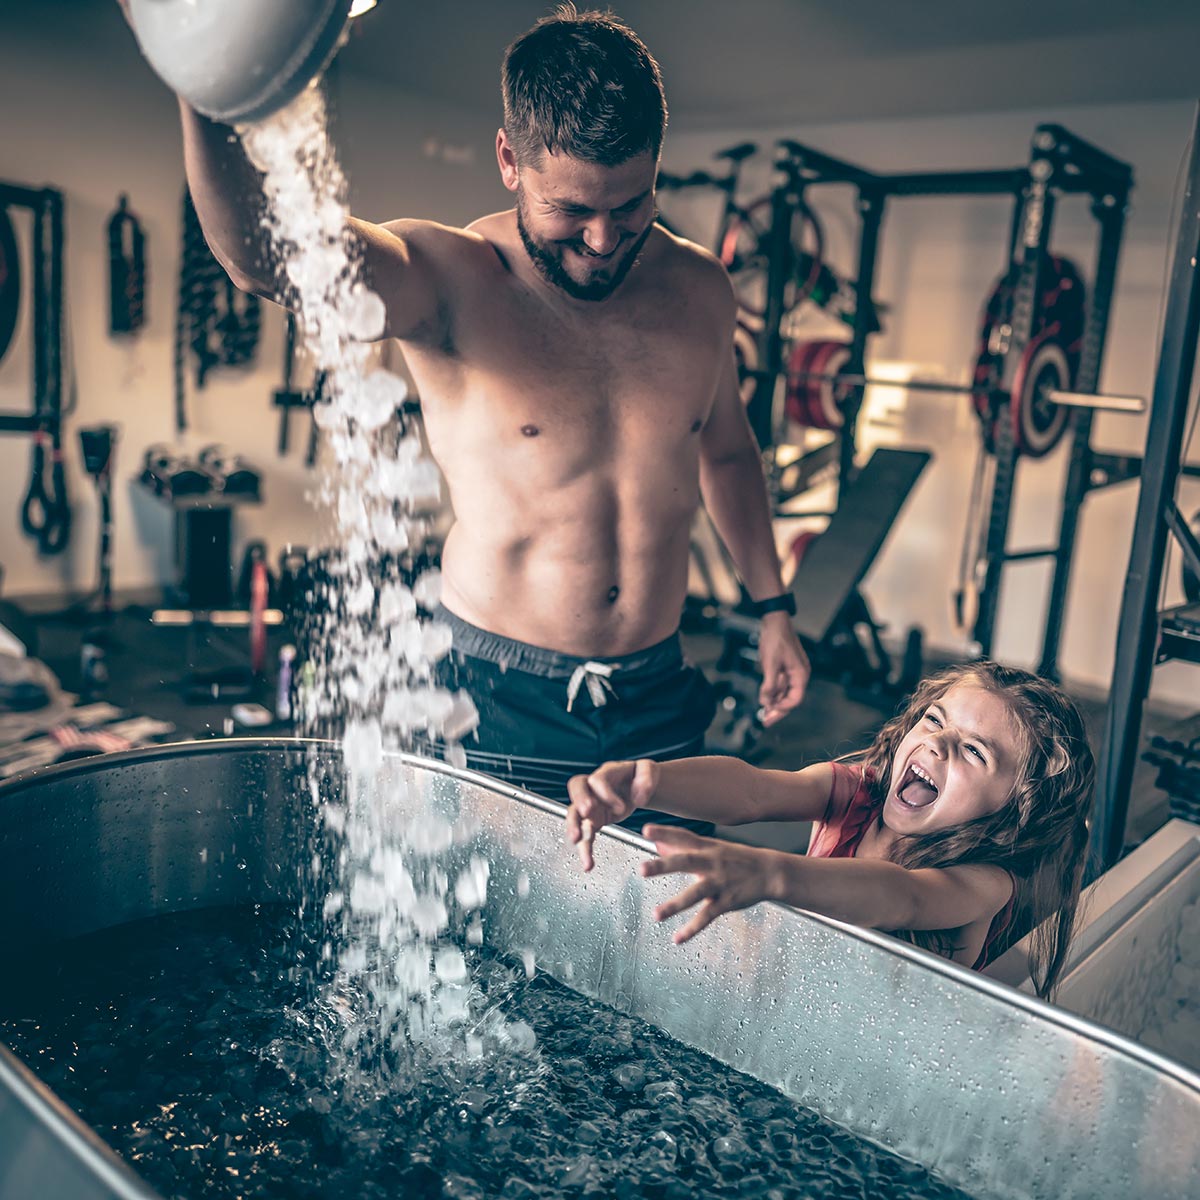 Plunge All-In  At-Home Ice Bath For Cold Water Therapy